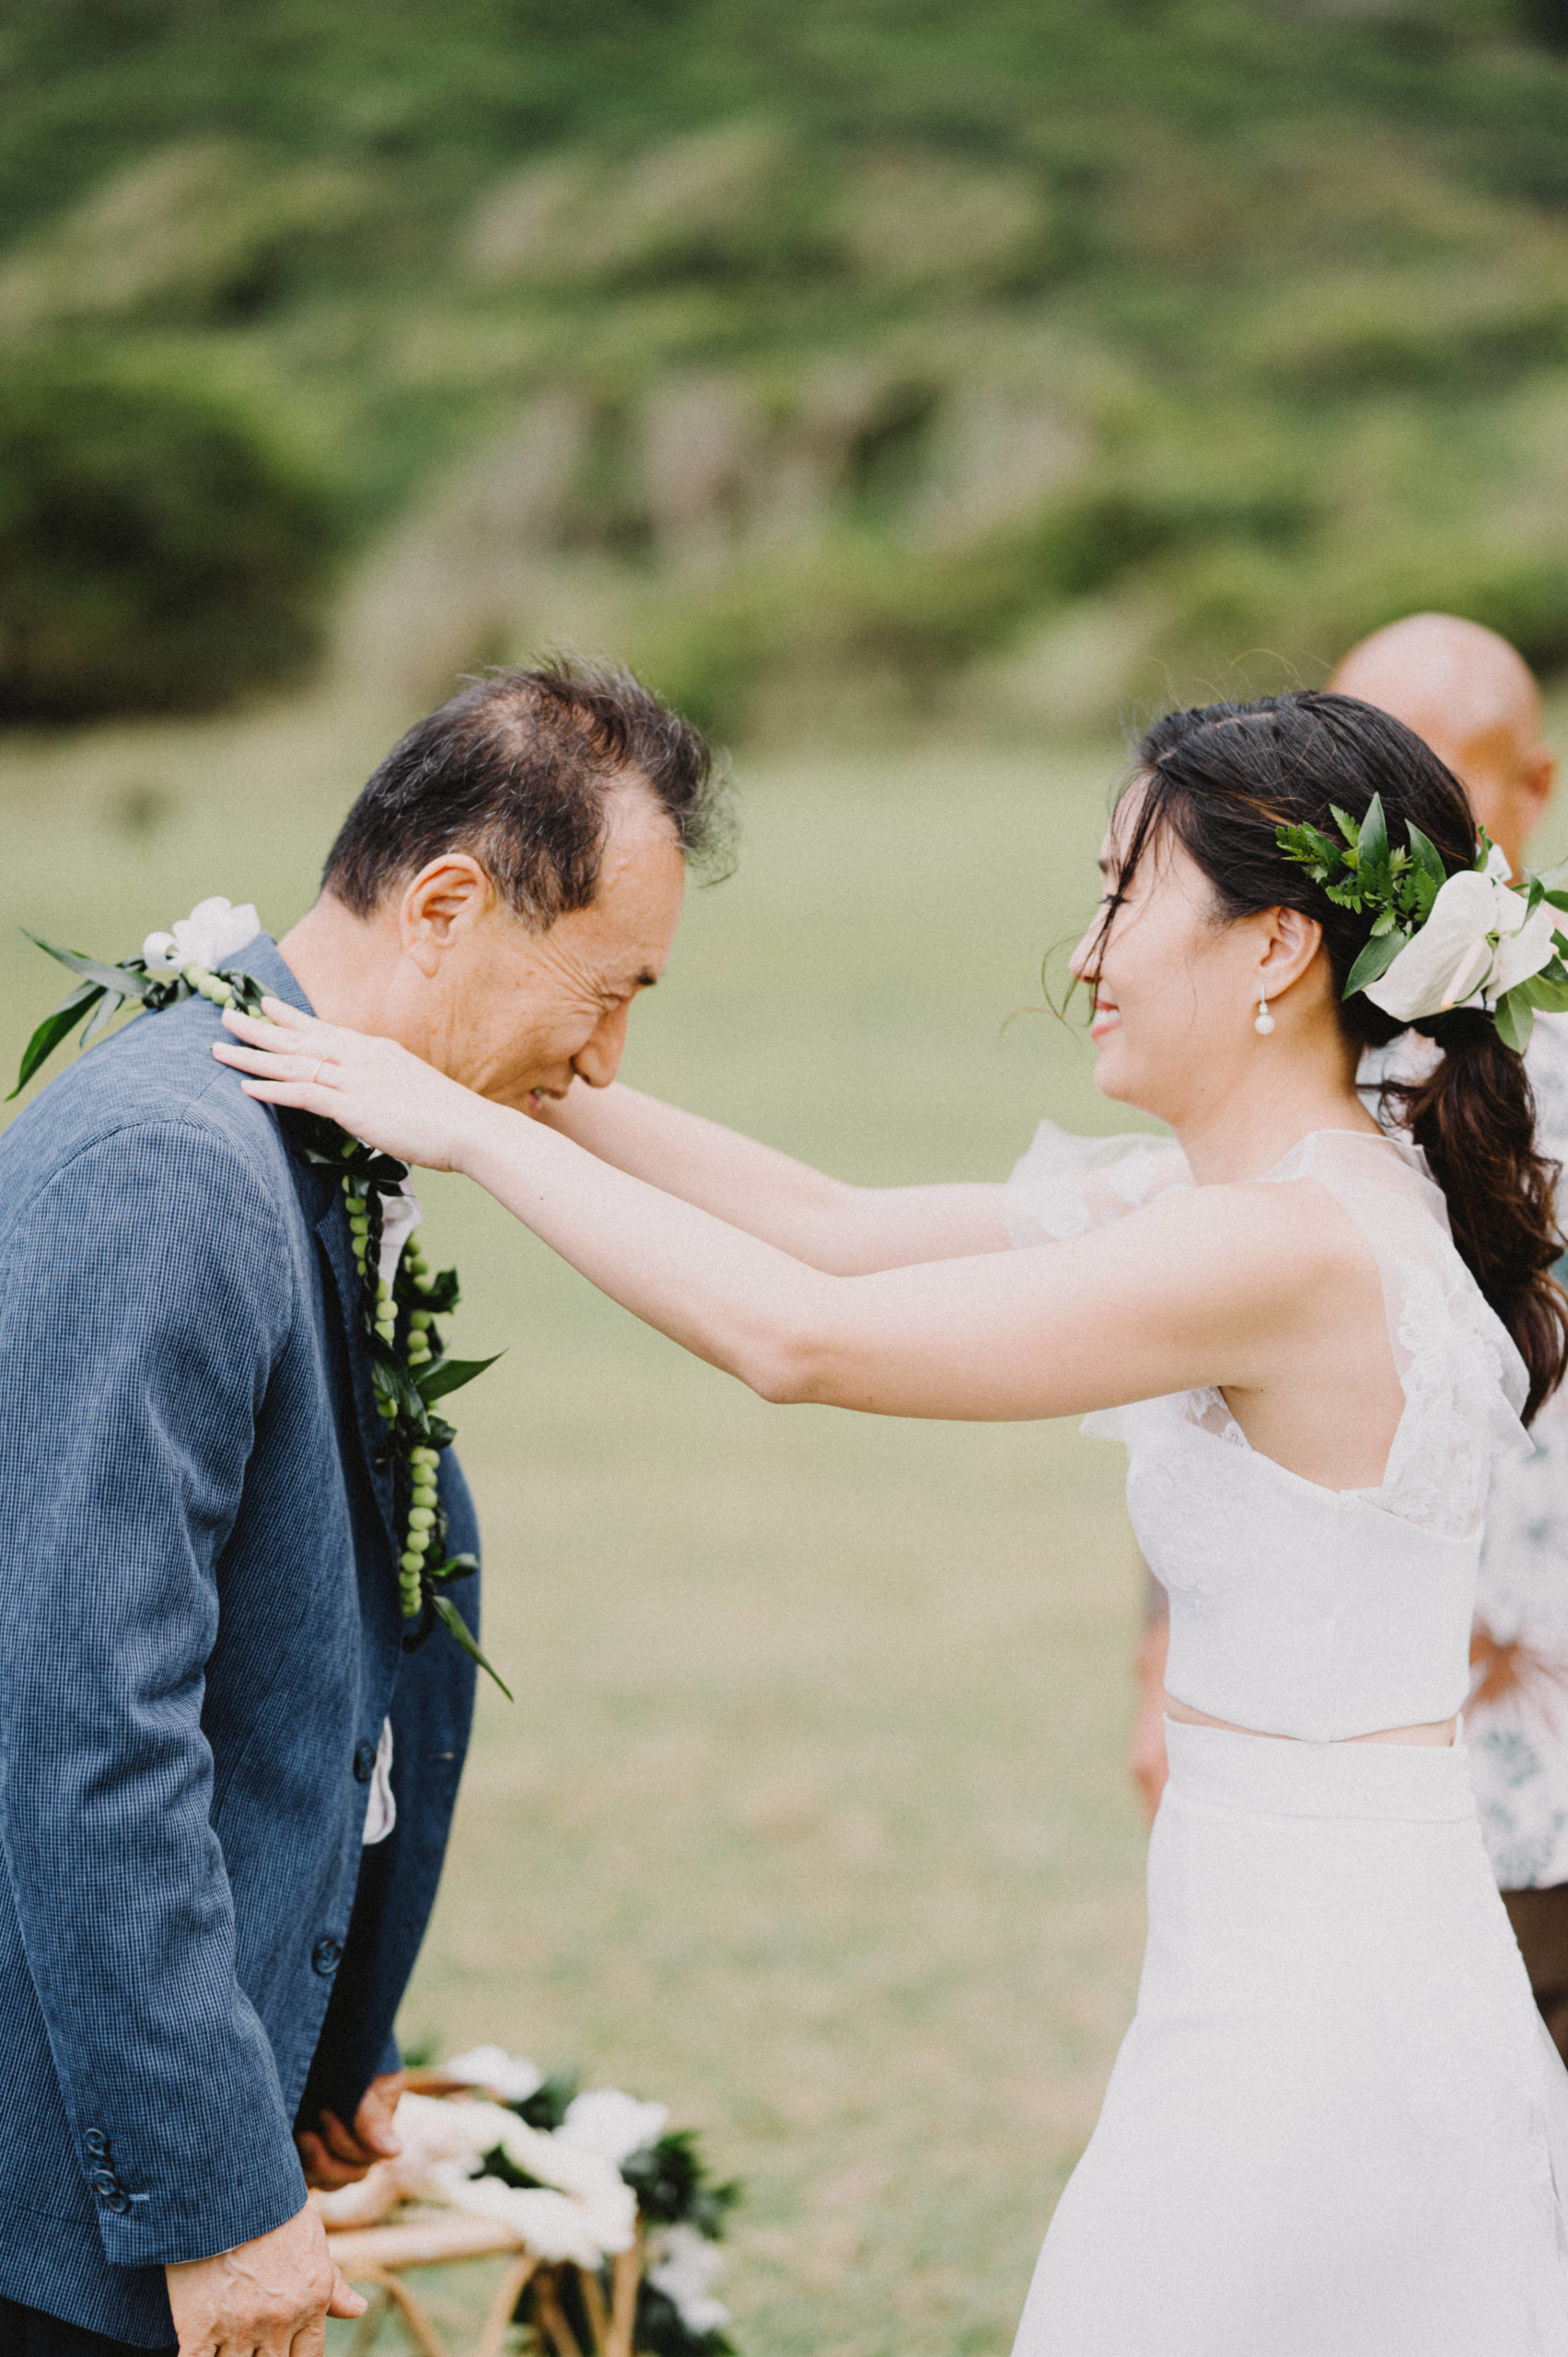 Tender moment as the bride places a lei on her father L Hewitt Photography